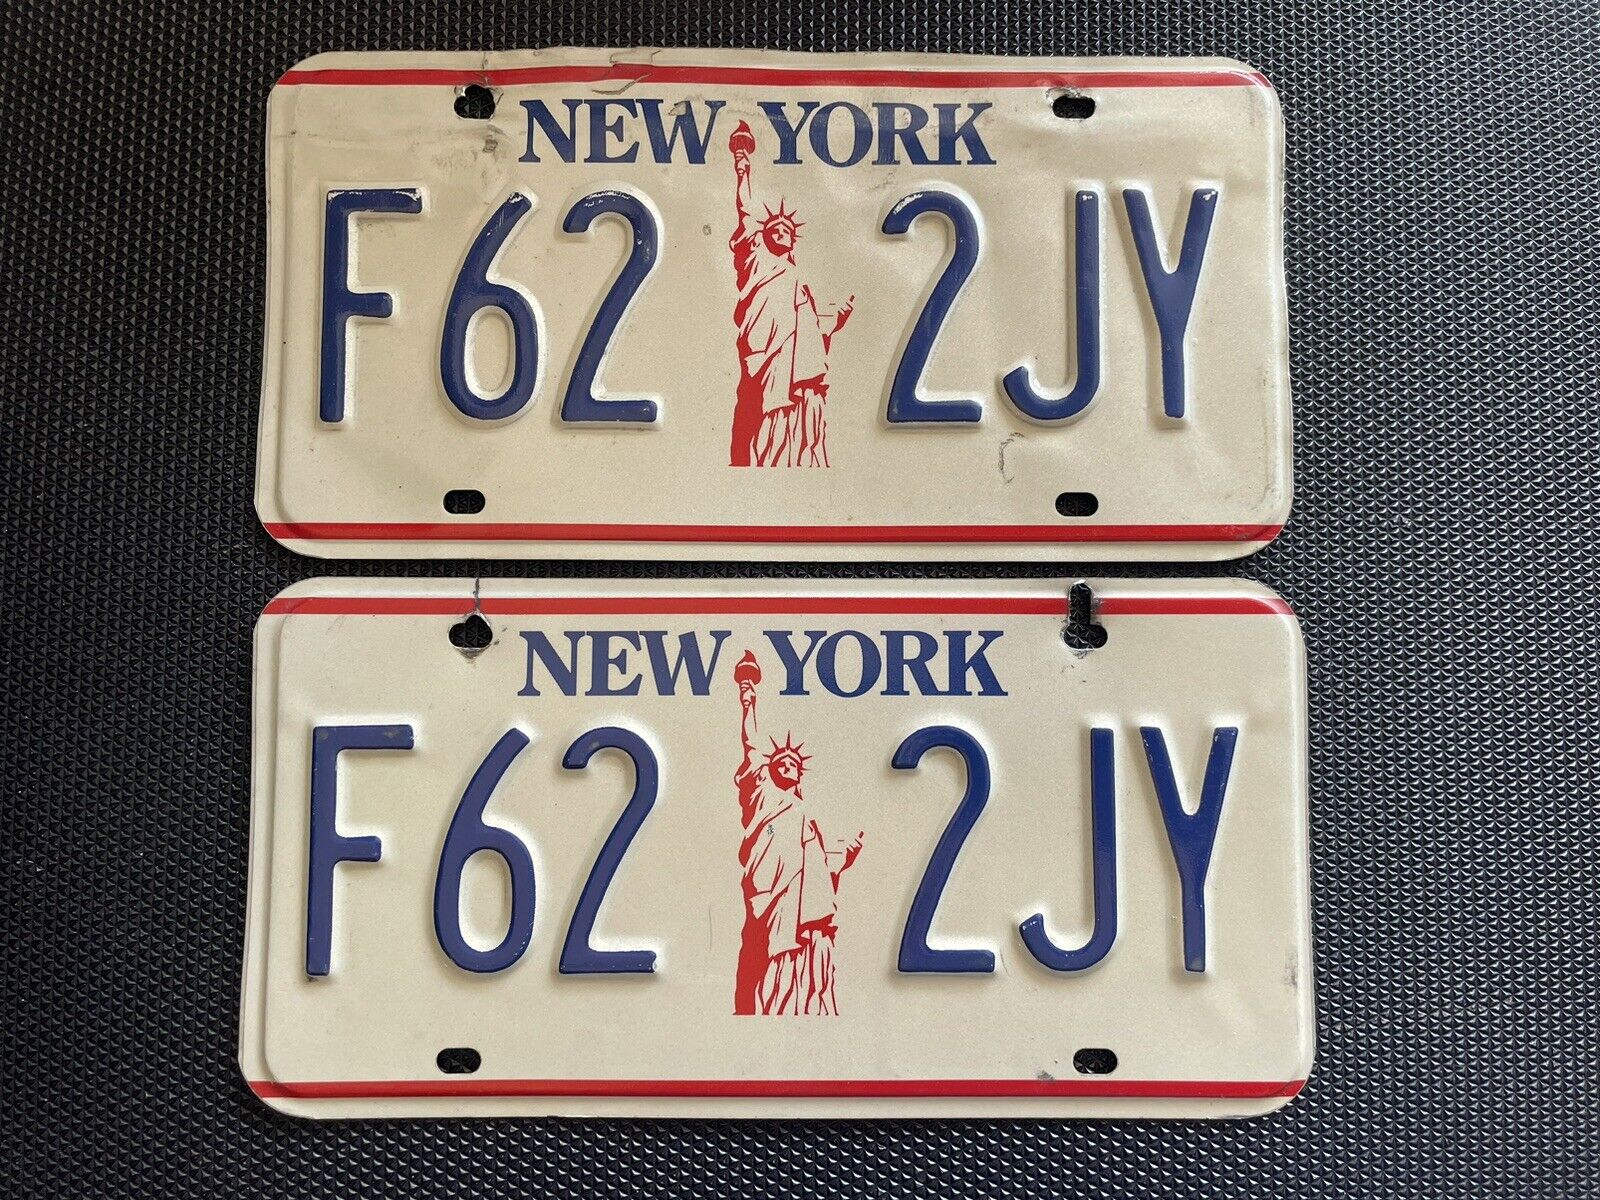 PAIR OF NEW YORK LICENSE PLATES STATUE OF LIBERTY F62 2JY